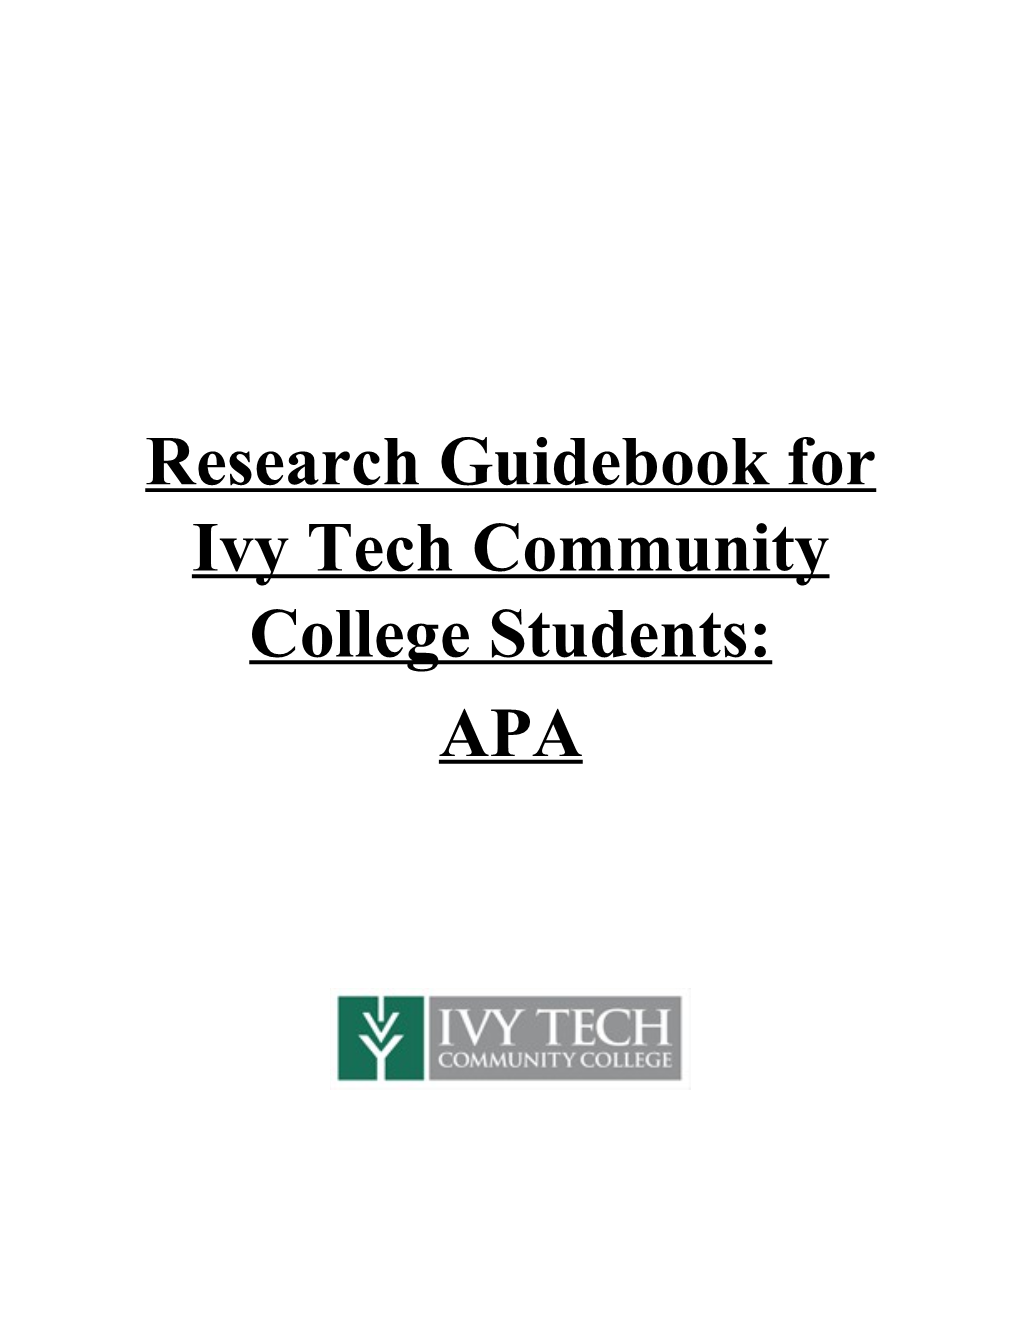 Research Guidebook for Ivy Tech Community College Students